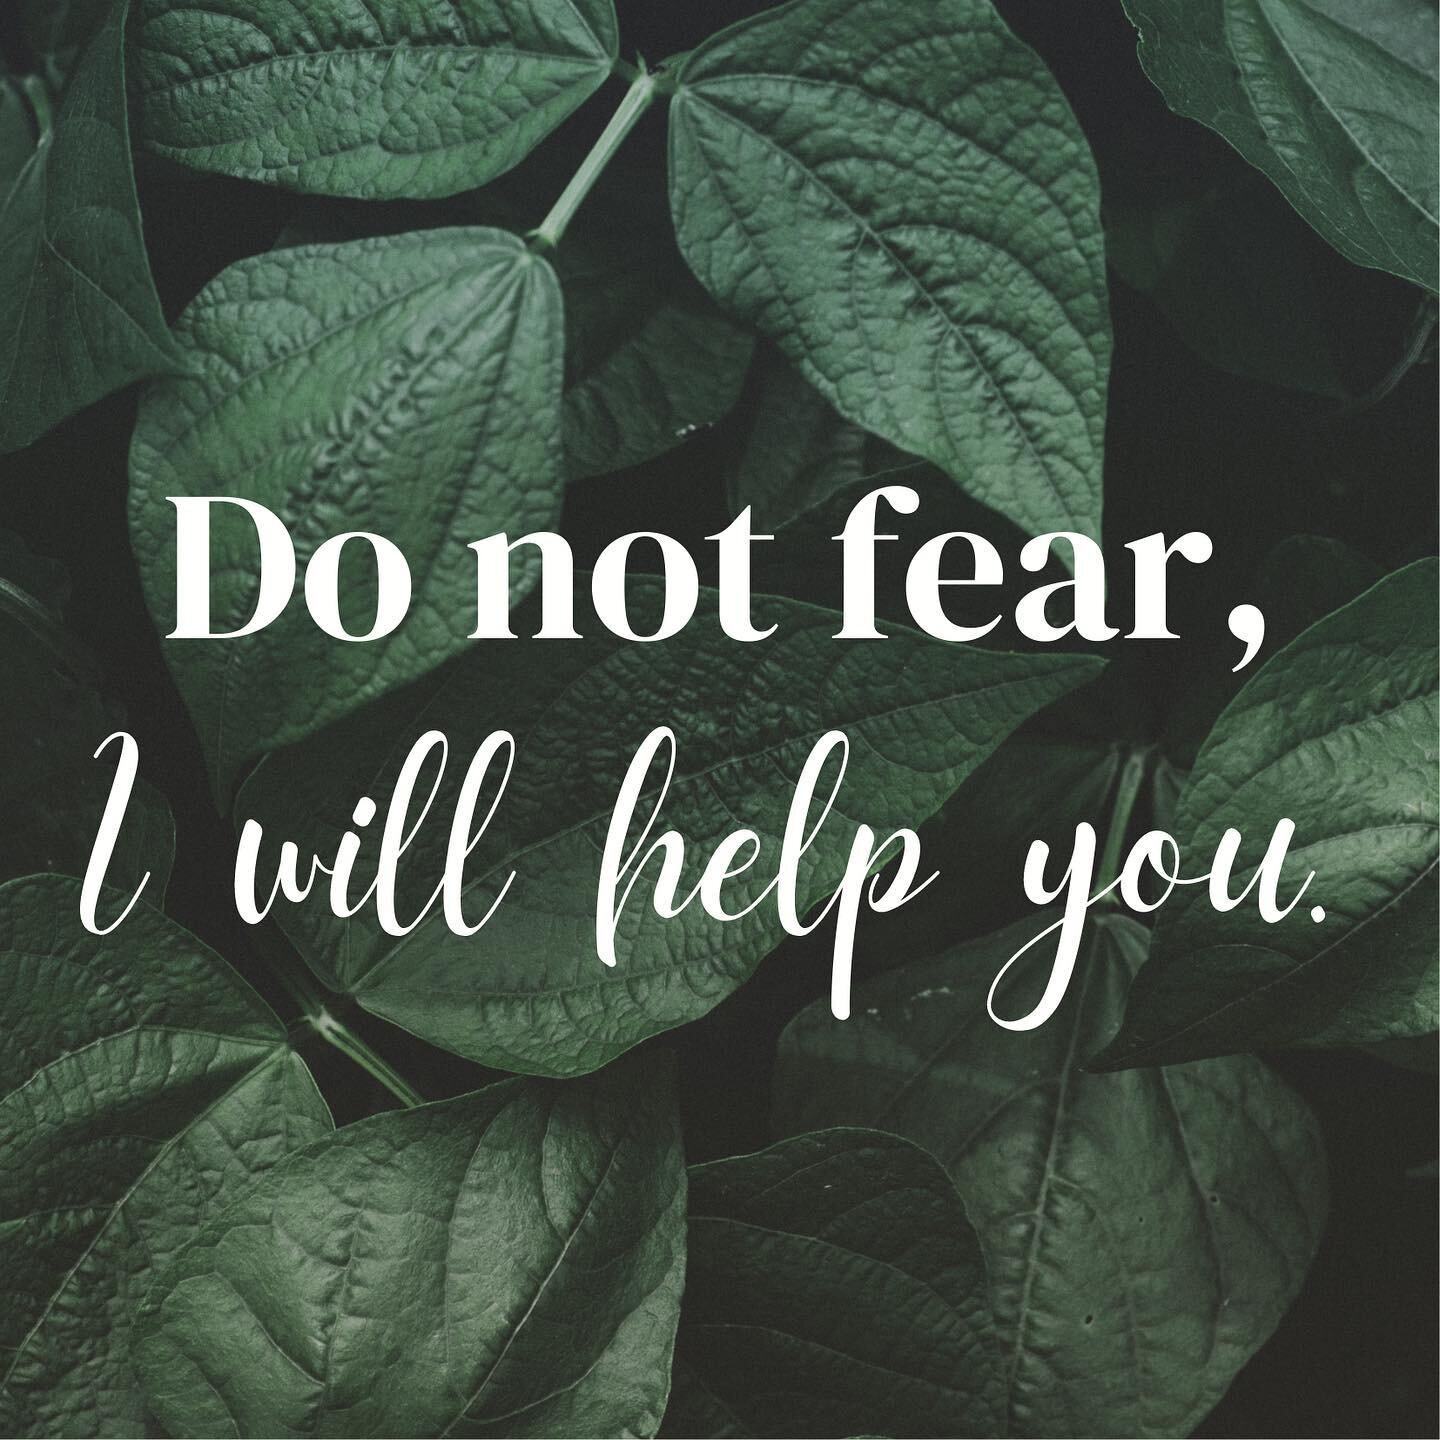 Thoughtful Thursday: &ldquo;For I, the Lord your God, hold your right hand; it is I who say to you, &ldquo;Do not fear, I will help you.&rdquo;&rdquo; Isaiah‬ ‭41:13‬ ‭NRSV‬‬